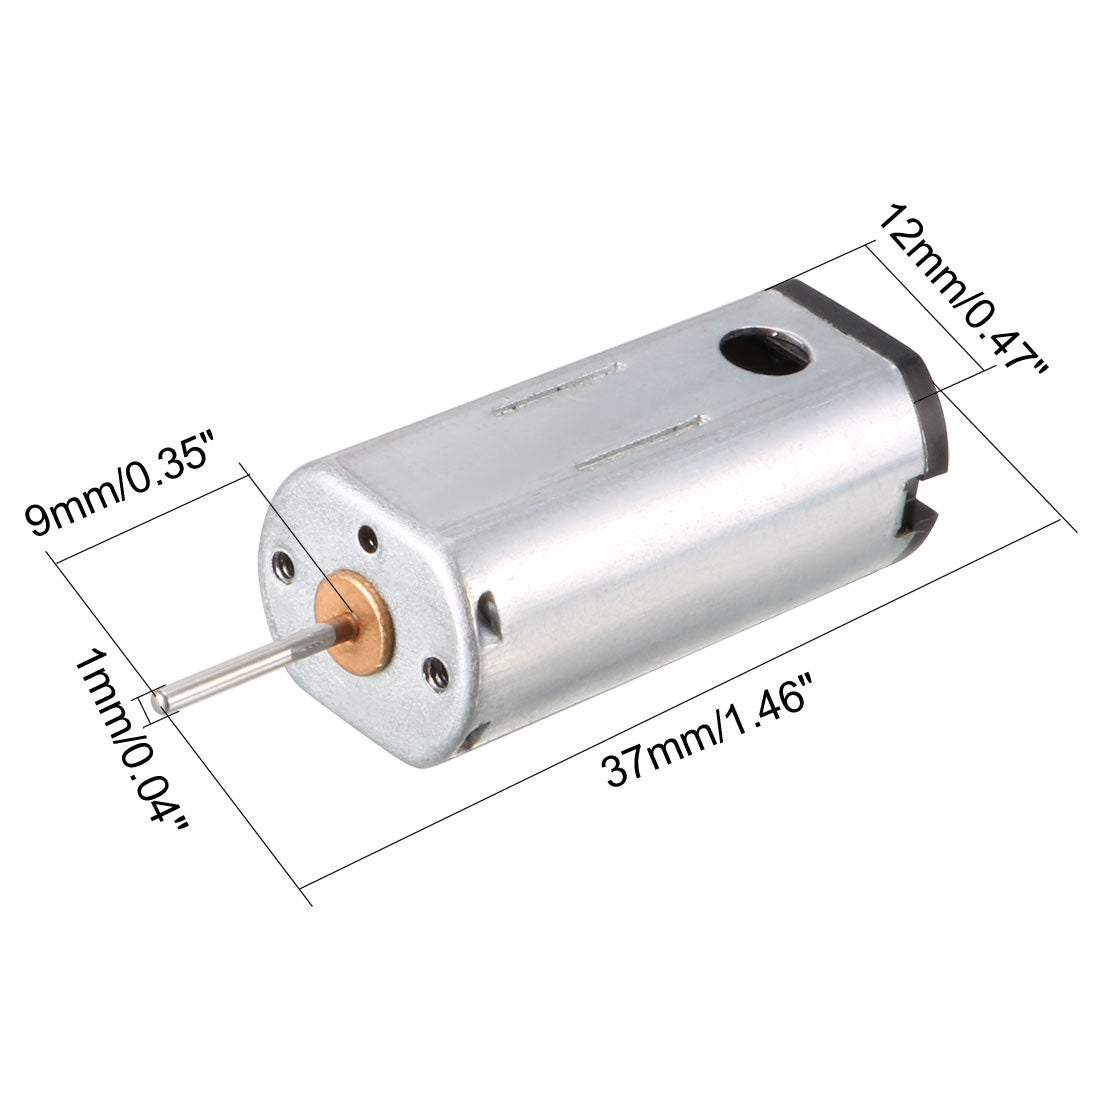 uxcell Uxcell DC Motor 3V 30000RPM Electric Motor Round Shaft 3 Pcs for RC Boat Toys Model